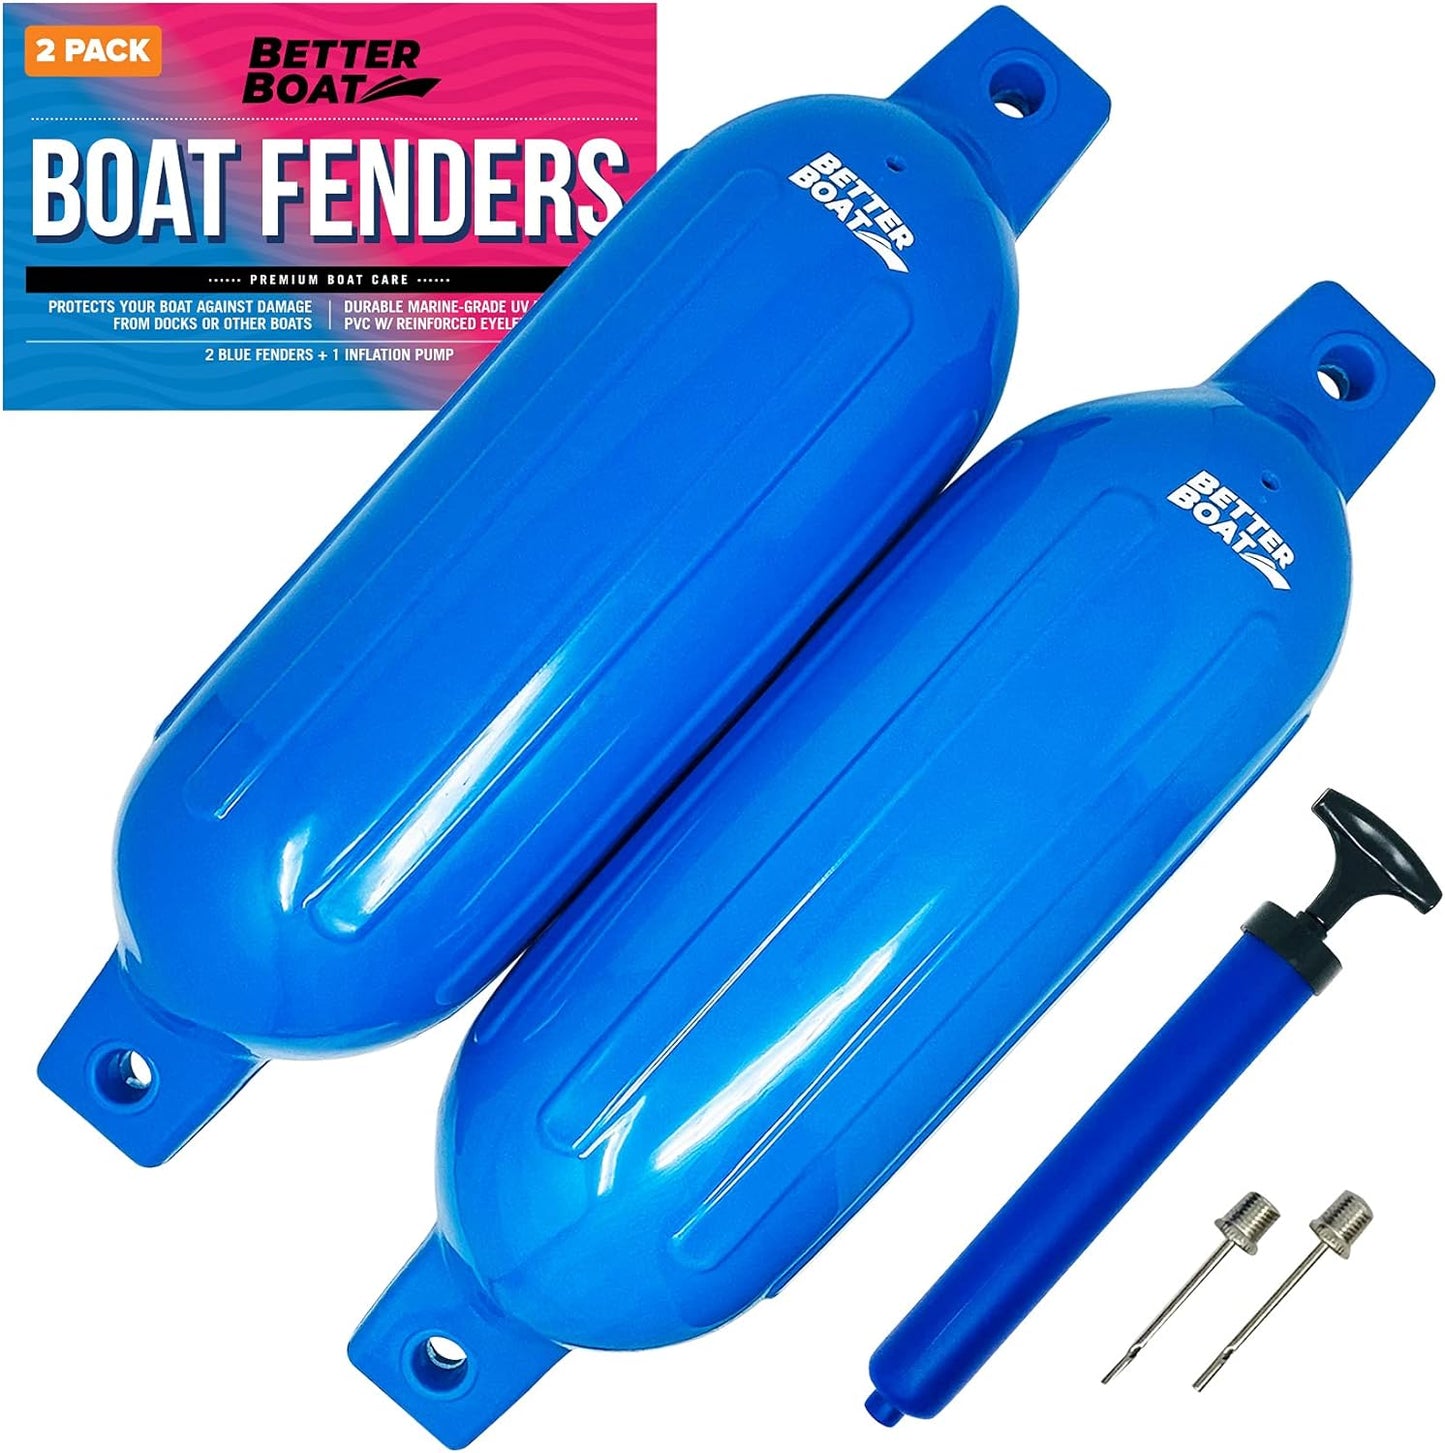 2 Pack Boat Fenders for Docking Boat Bumpers for Docking with Pump Boat Accessories Boat Dock Bumpers Set Buoys Pontoons Buoy Inflatable Fender Marine Bouys 23" X 6.5" Black Blue or White